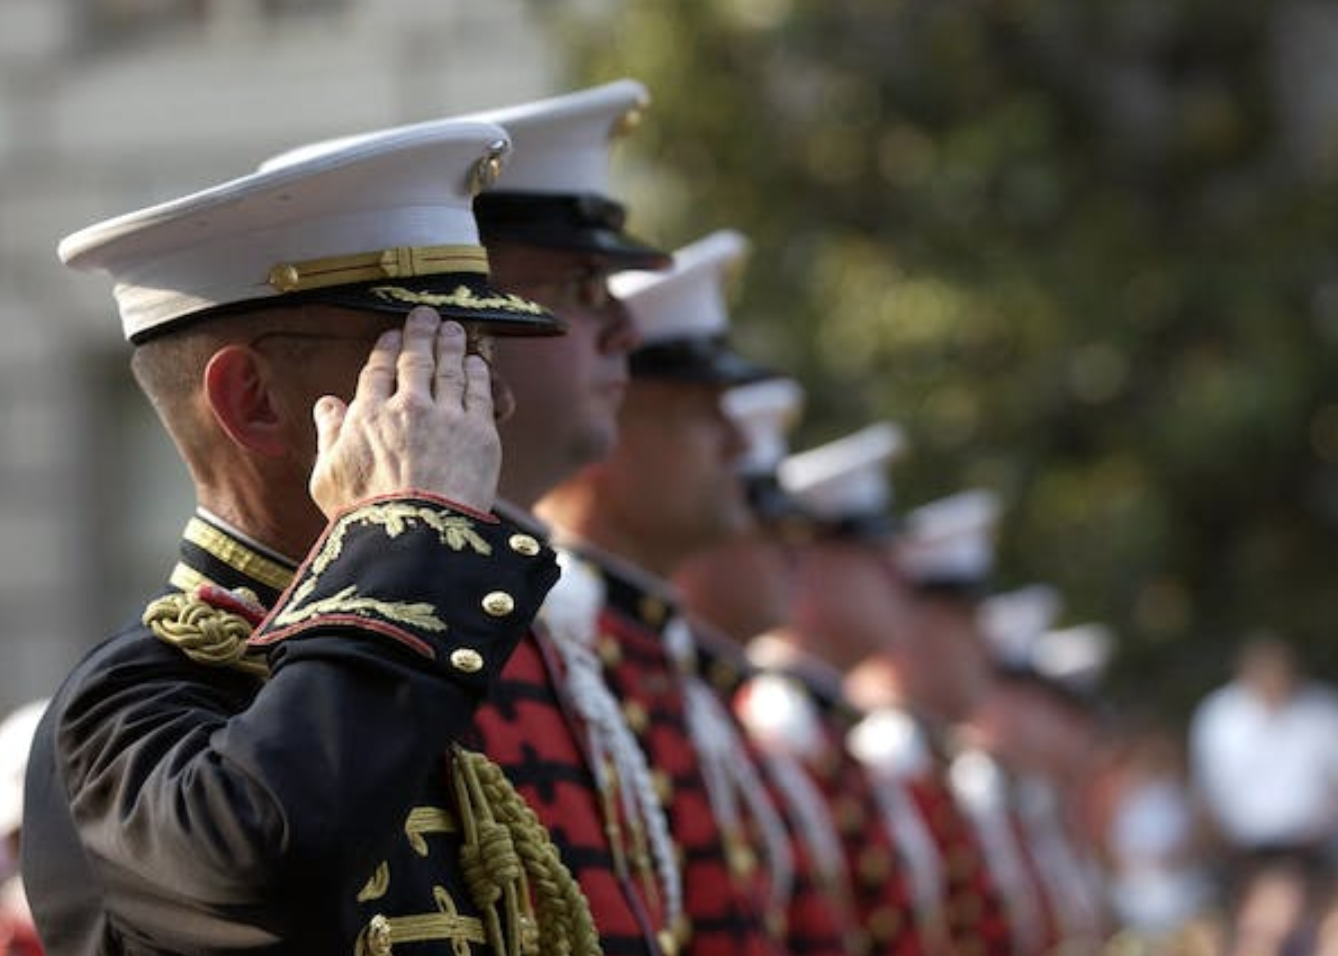 Soldiers in dress uniform in formation; image by Pixabay, via Pexels.com.